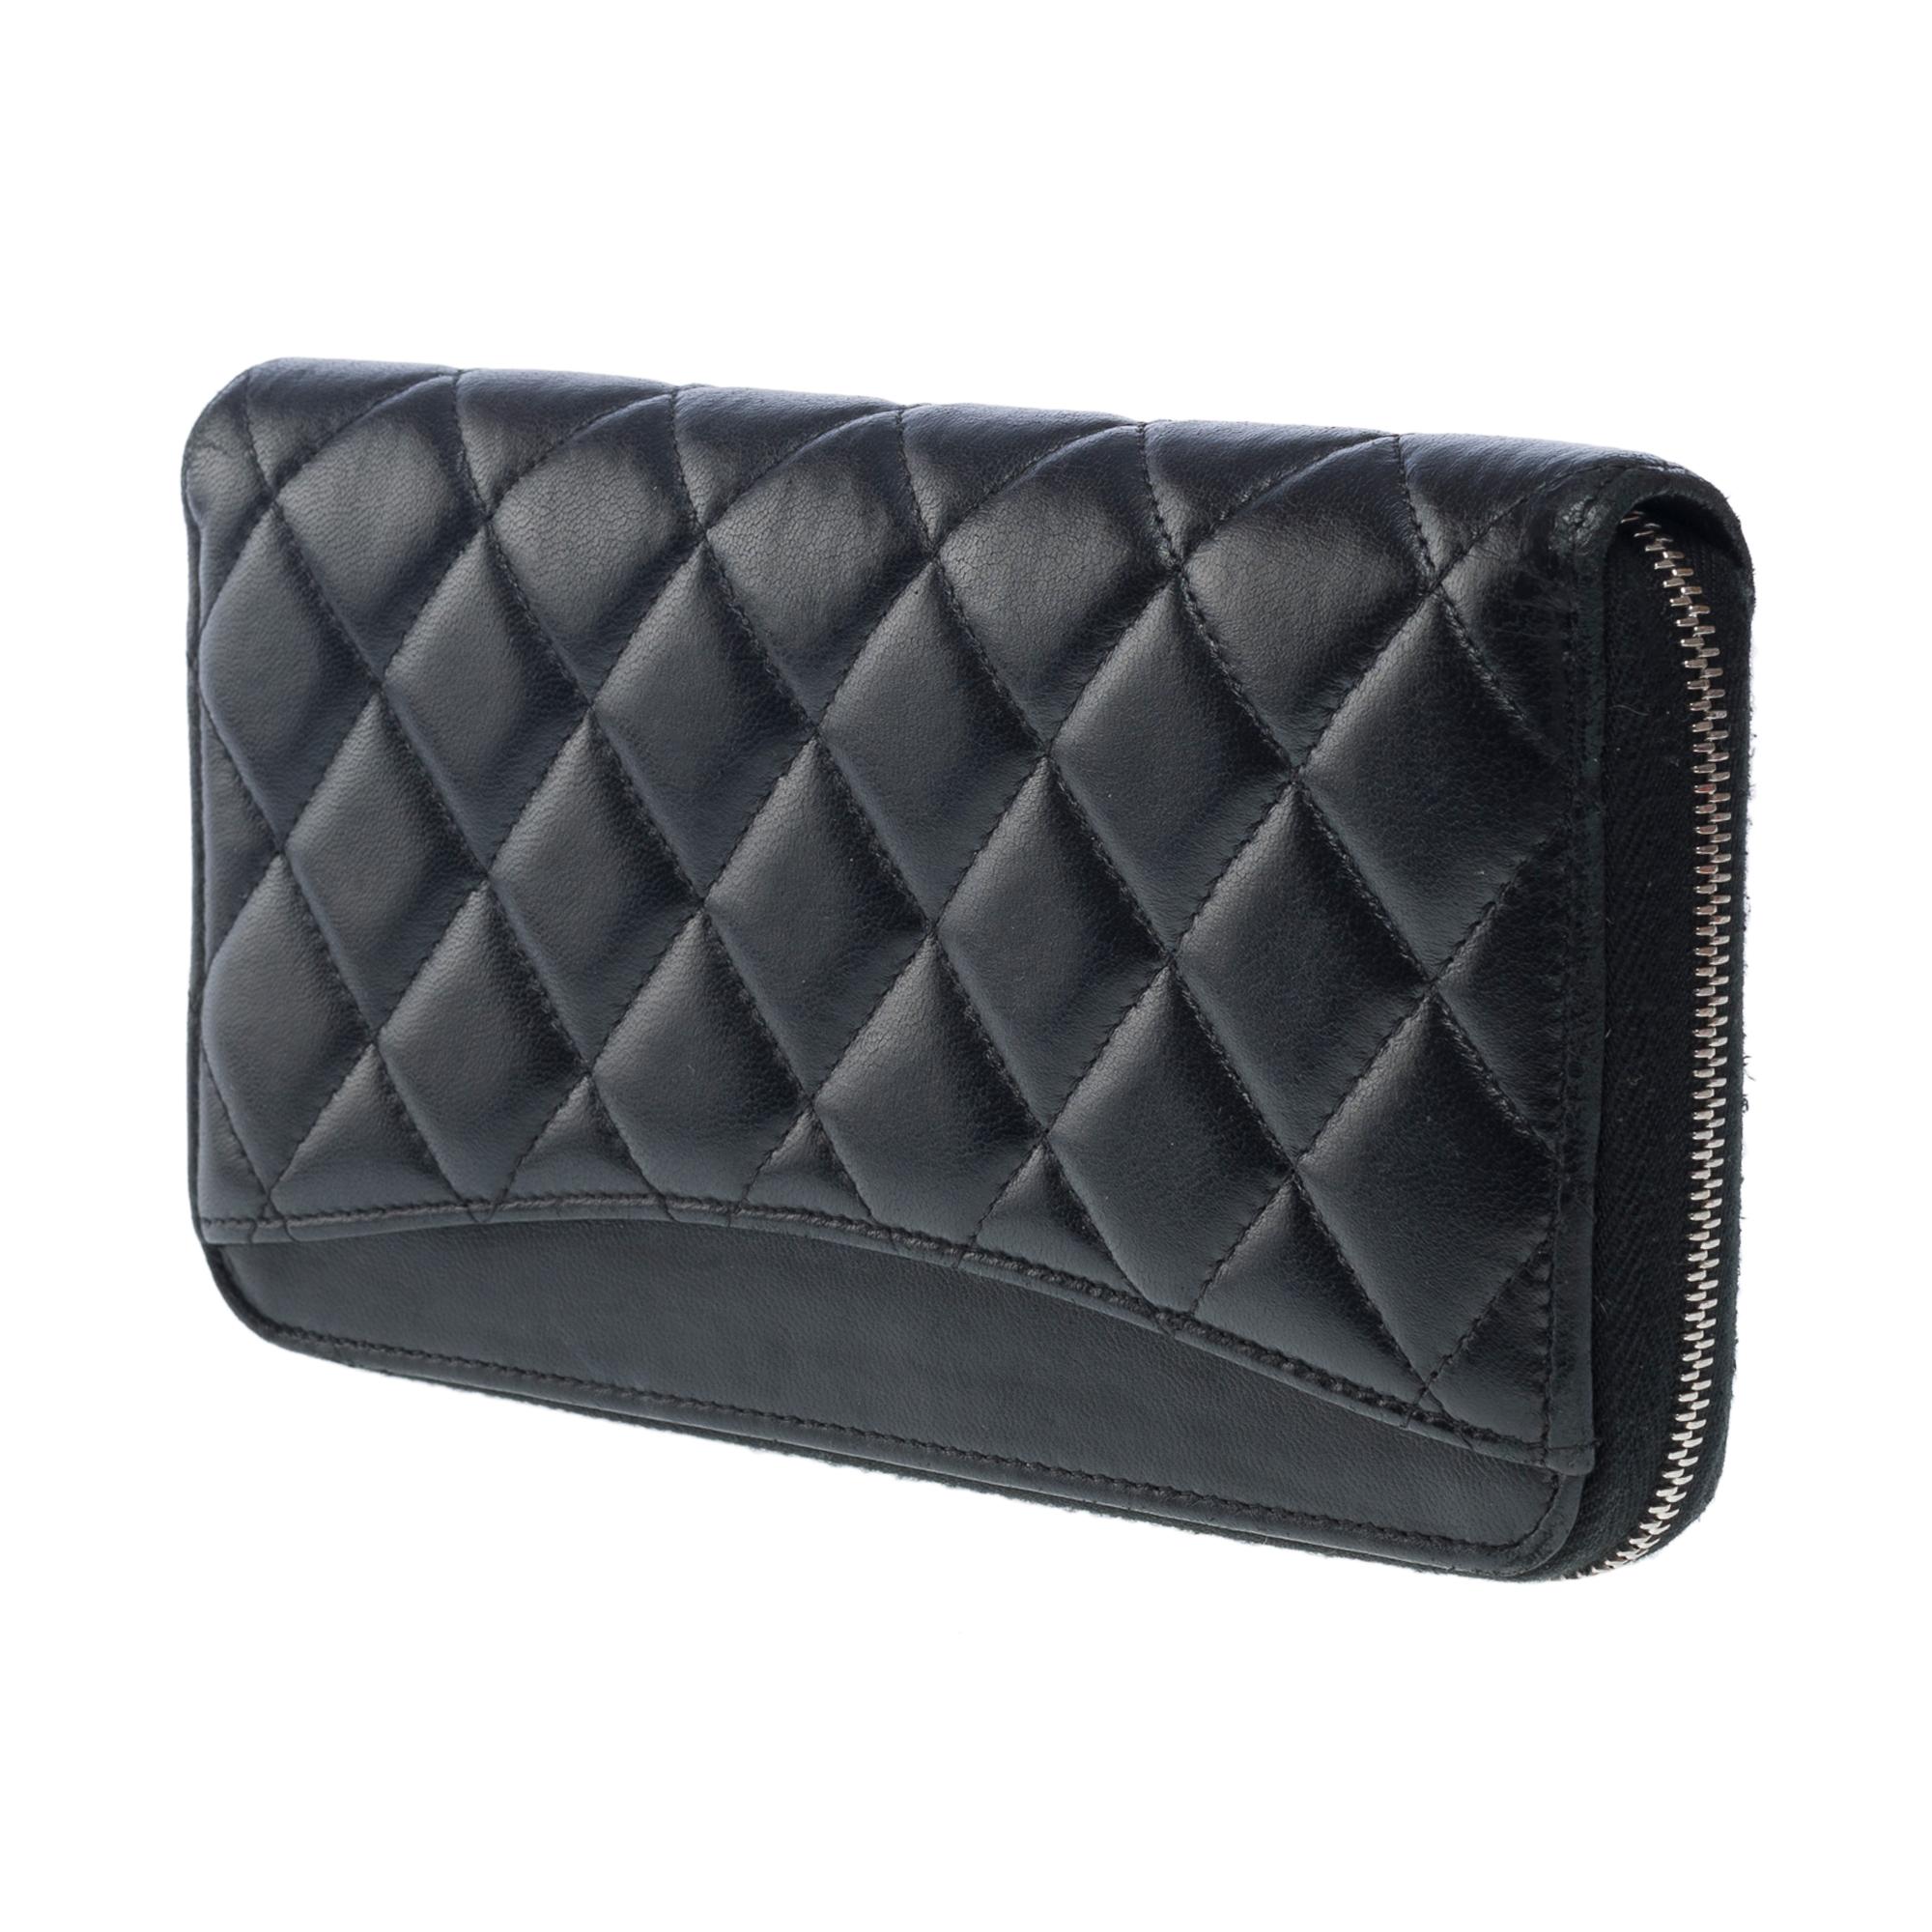 Lovely Chanel Compagnon Wallet in black quilted lambskin leather, SHW For Sale 2